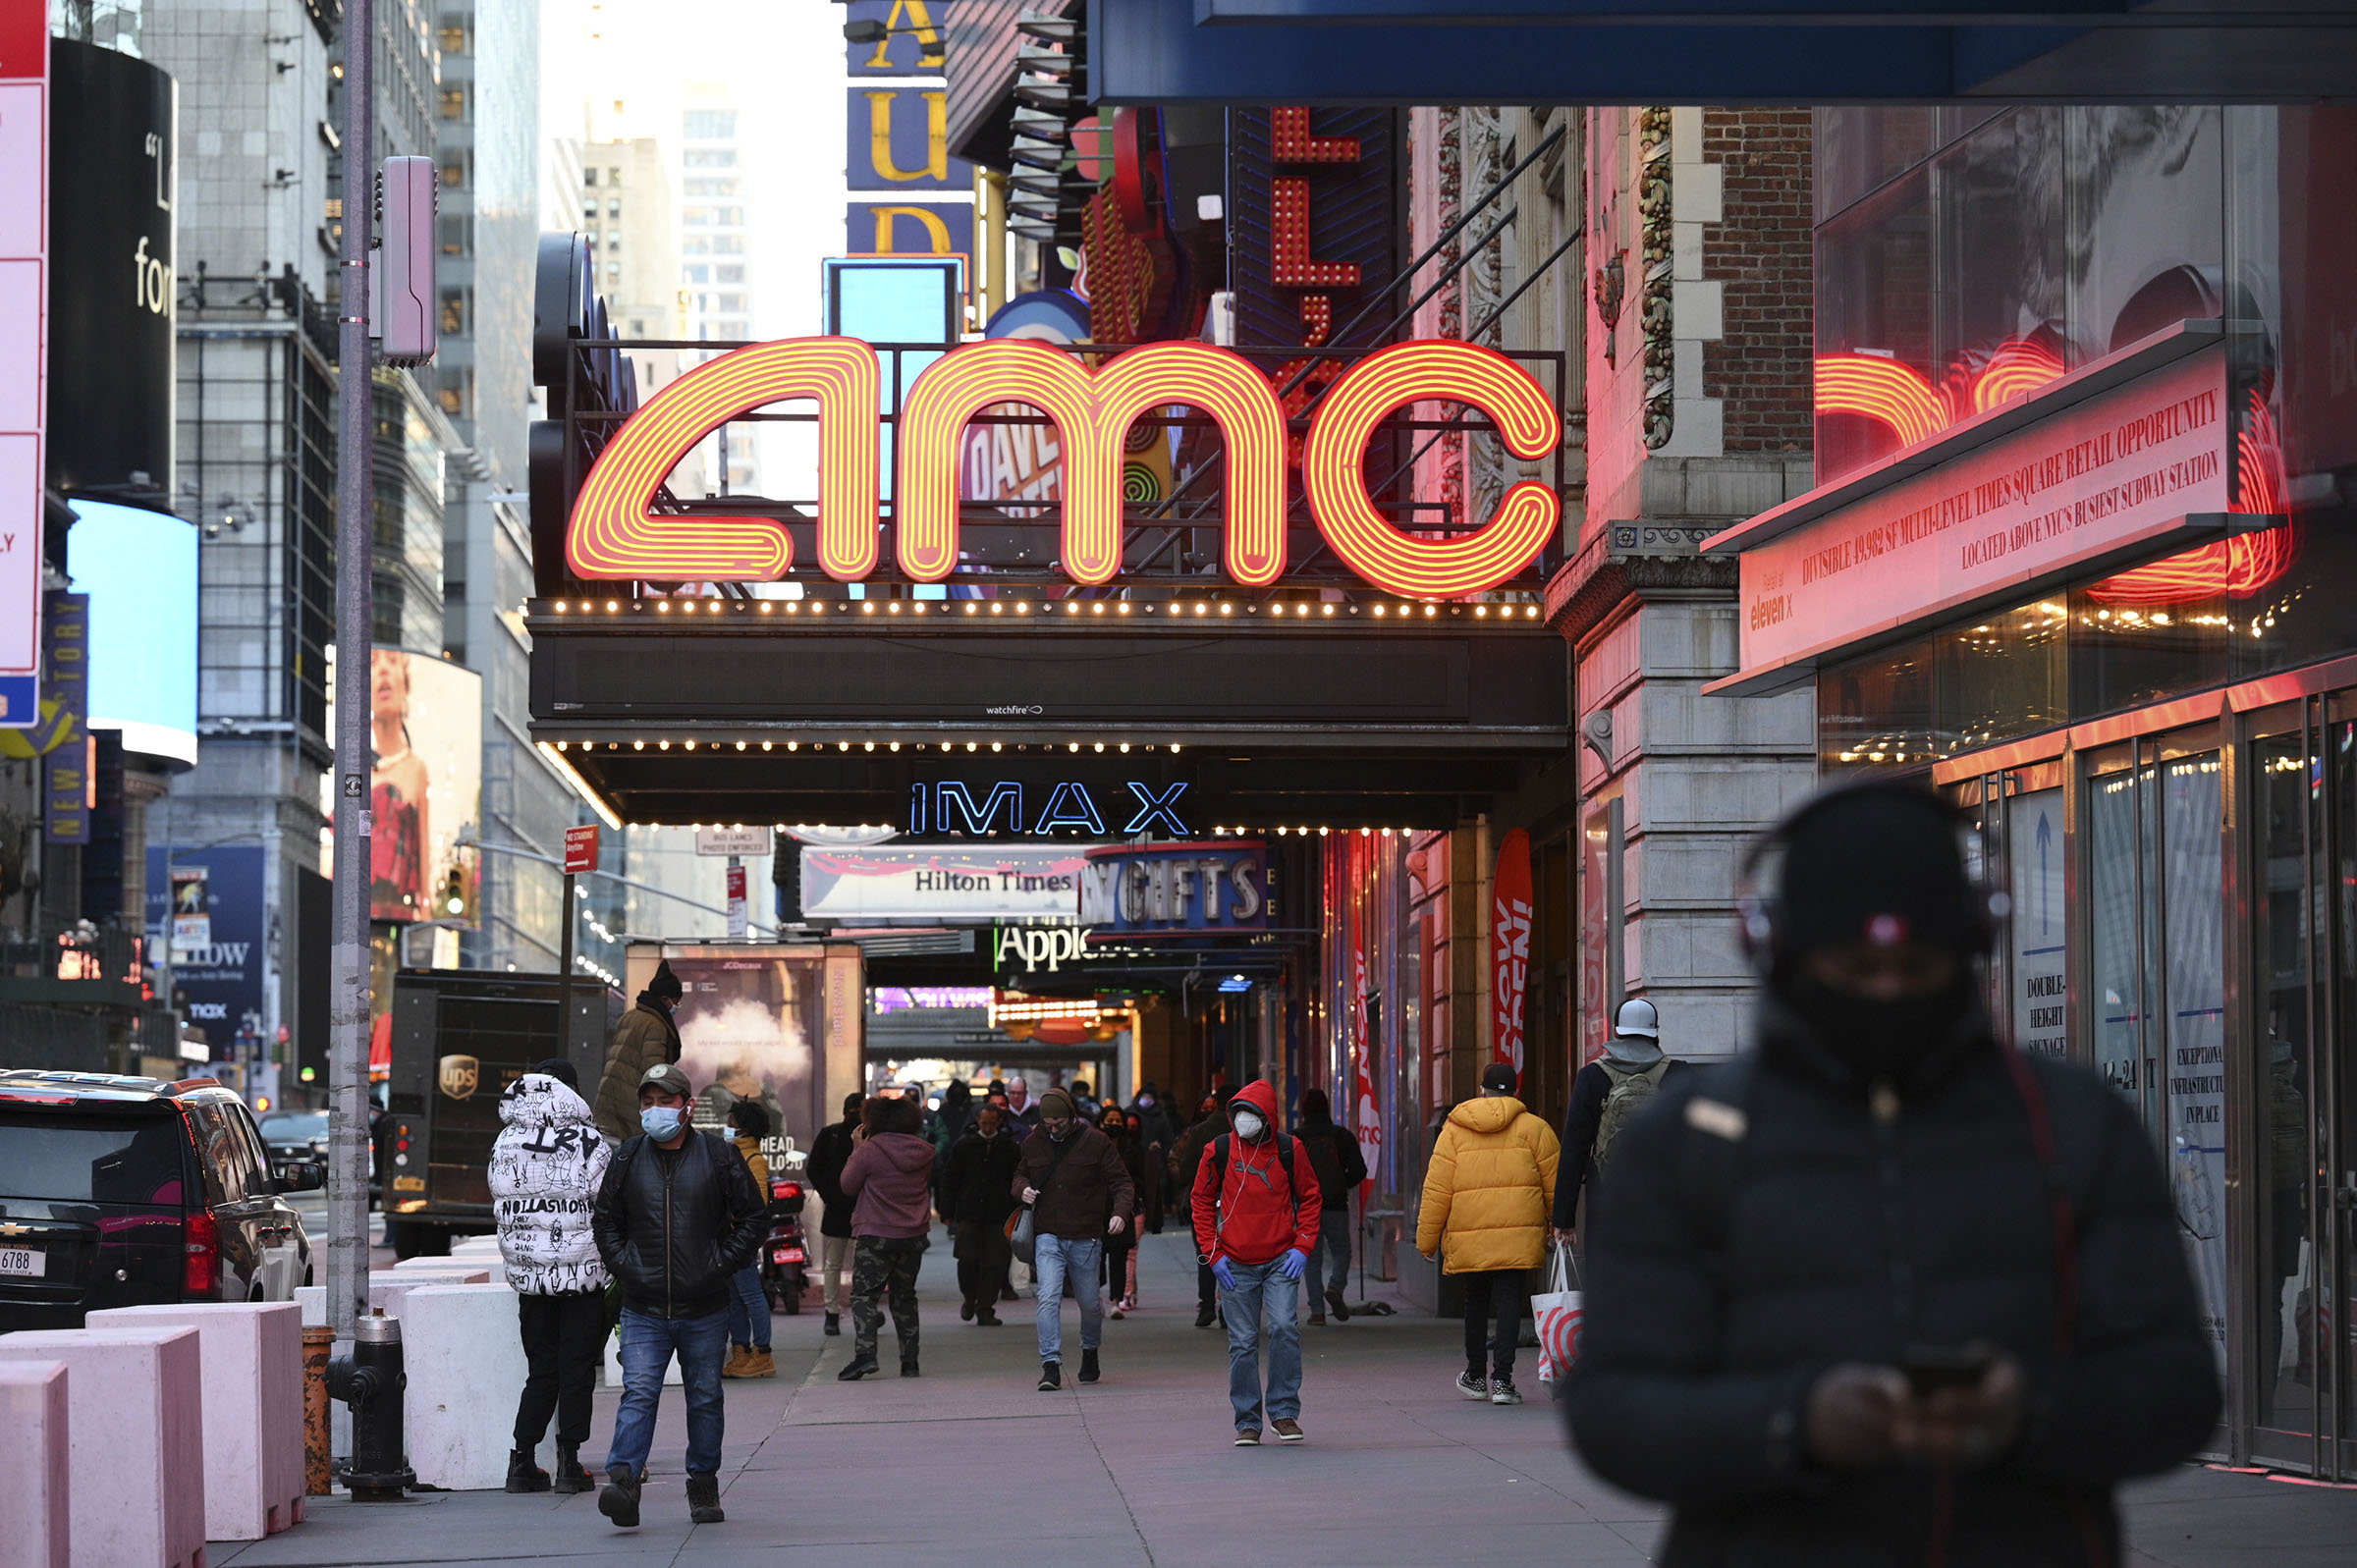 he AMC Empire 25 theater reopens after COVID-19 closures, Friday, March 5, 2021, in New York. Movie theater chain AMC is selling 8.5 million shares to investment firm Mudrick Capital Management, raising $230.5 million and cashing in on the meme stock frenzy that has helped boost its stock price in recent months. (Evan Agostini—Invision/AP)